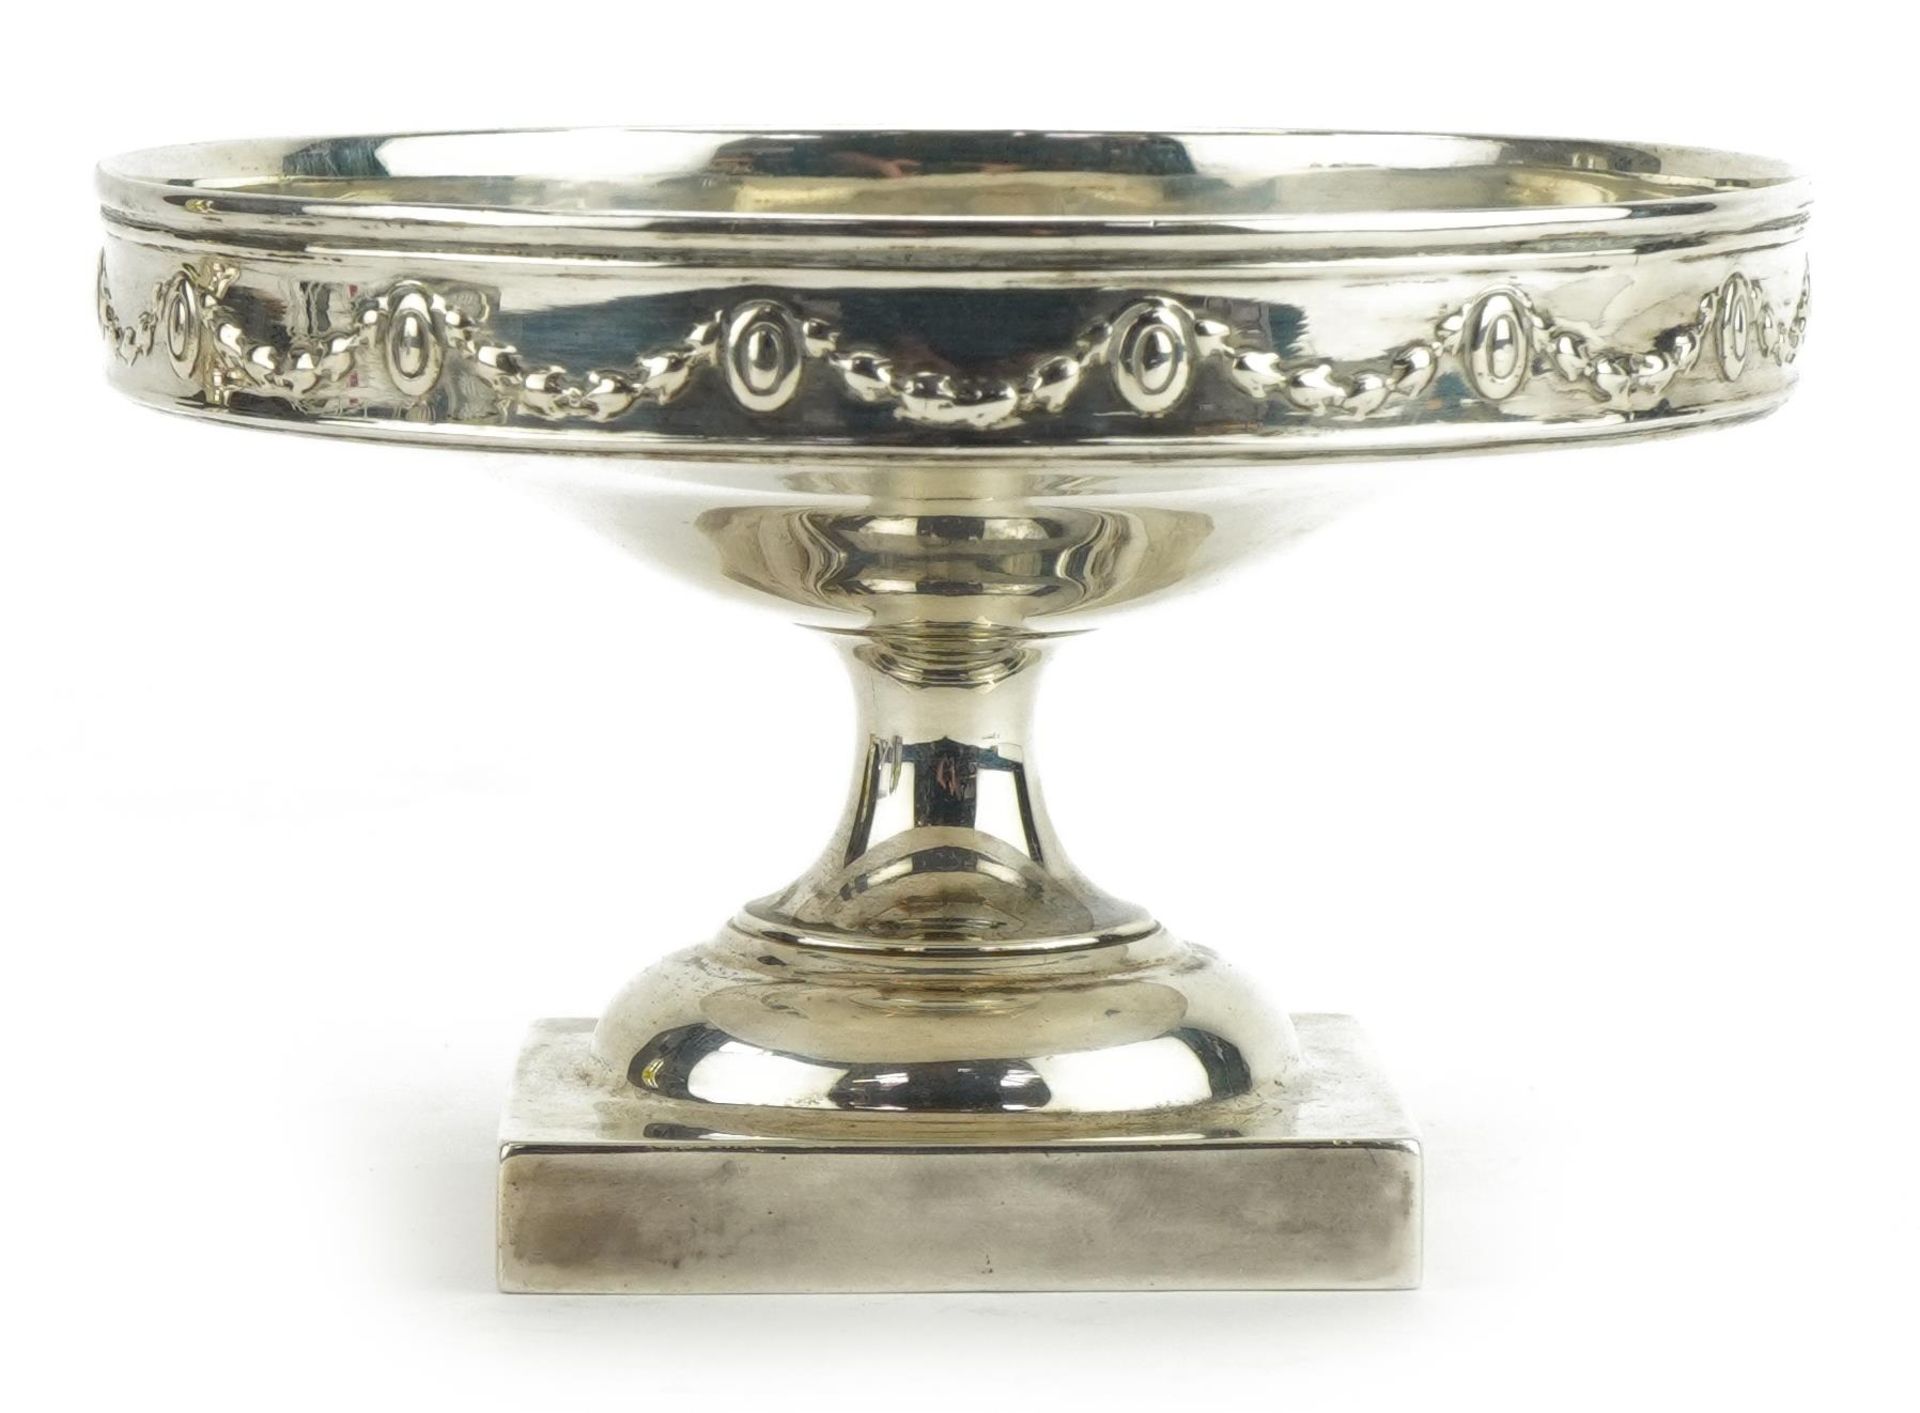 S Blanckensee & Son Ltd, Regency style pedestal dish decorated in relief with swags, Birmingham